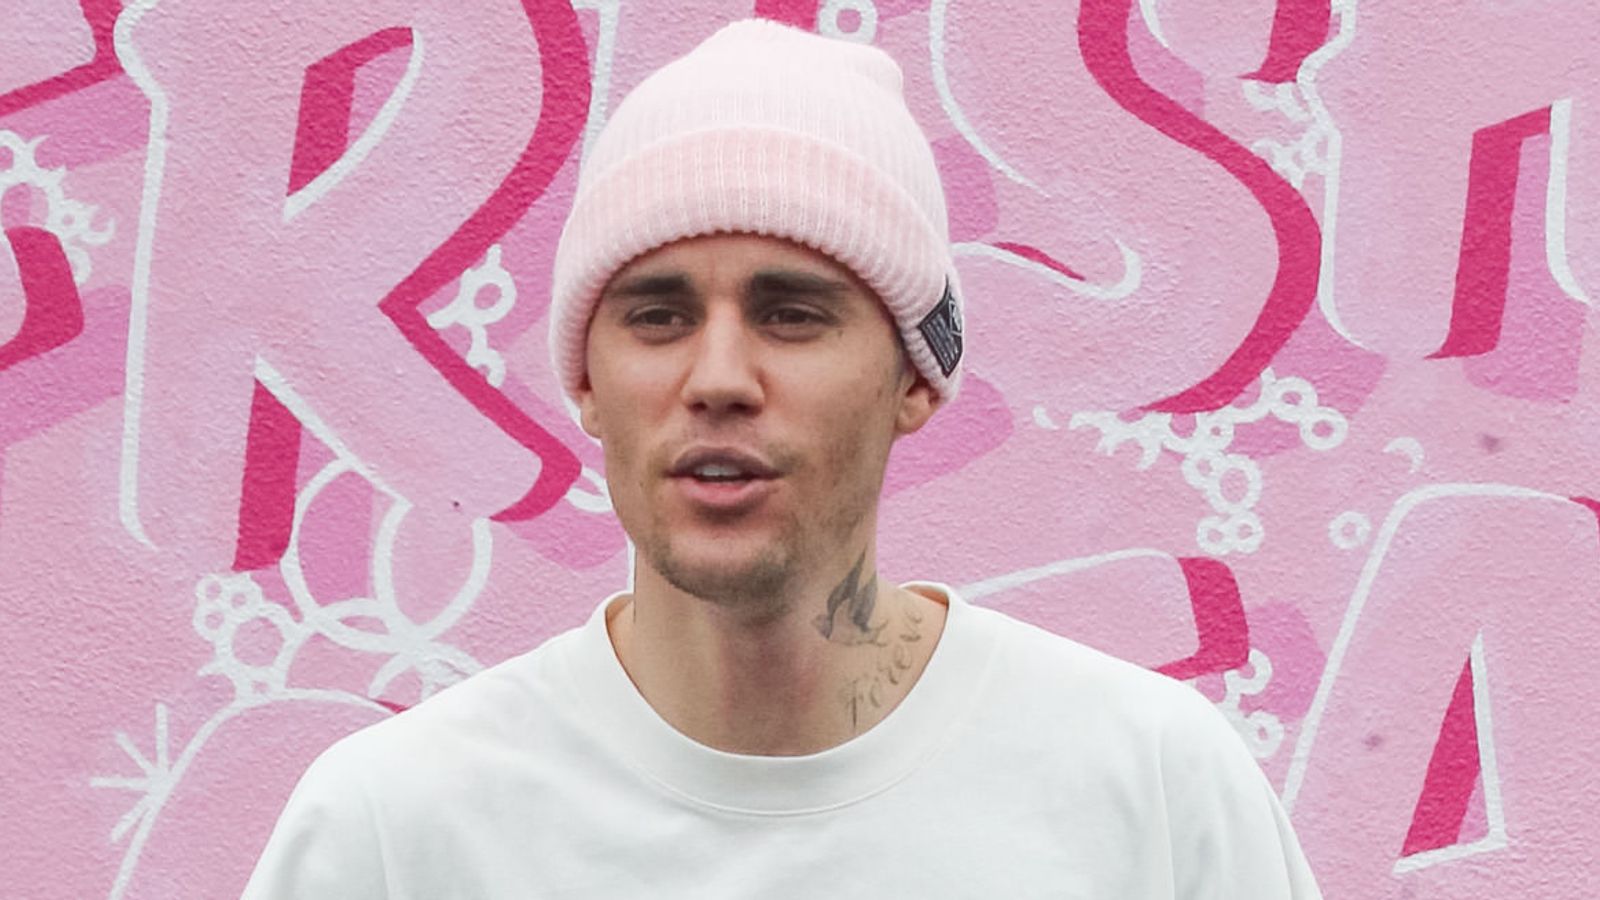 There is no truth to this': Justin Bieber denies sexual assault allegation. Ents & Arts News